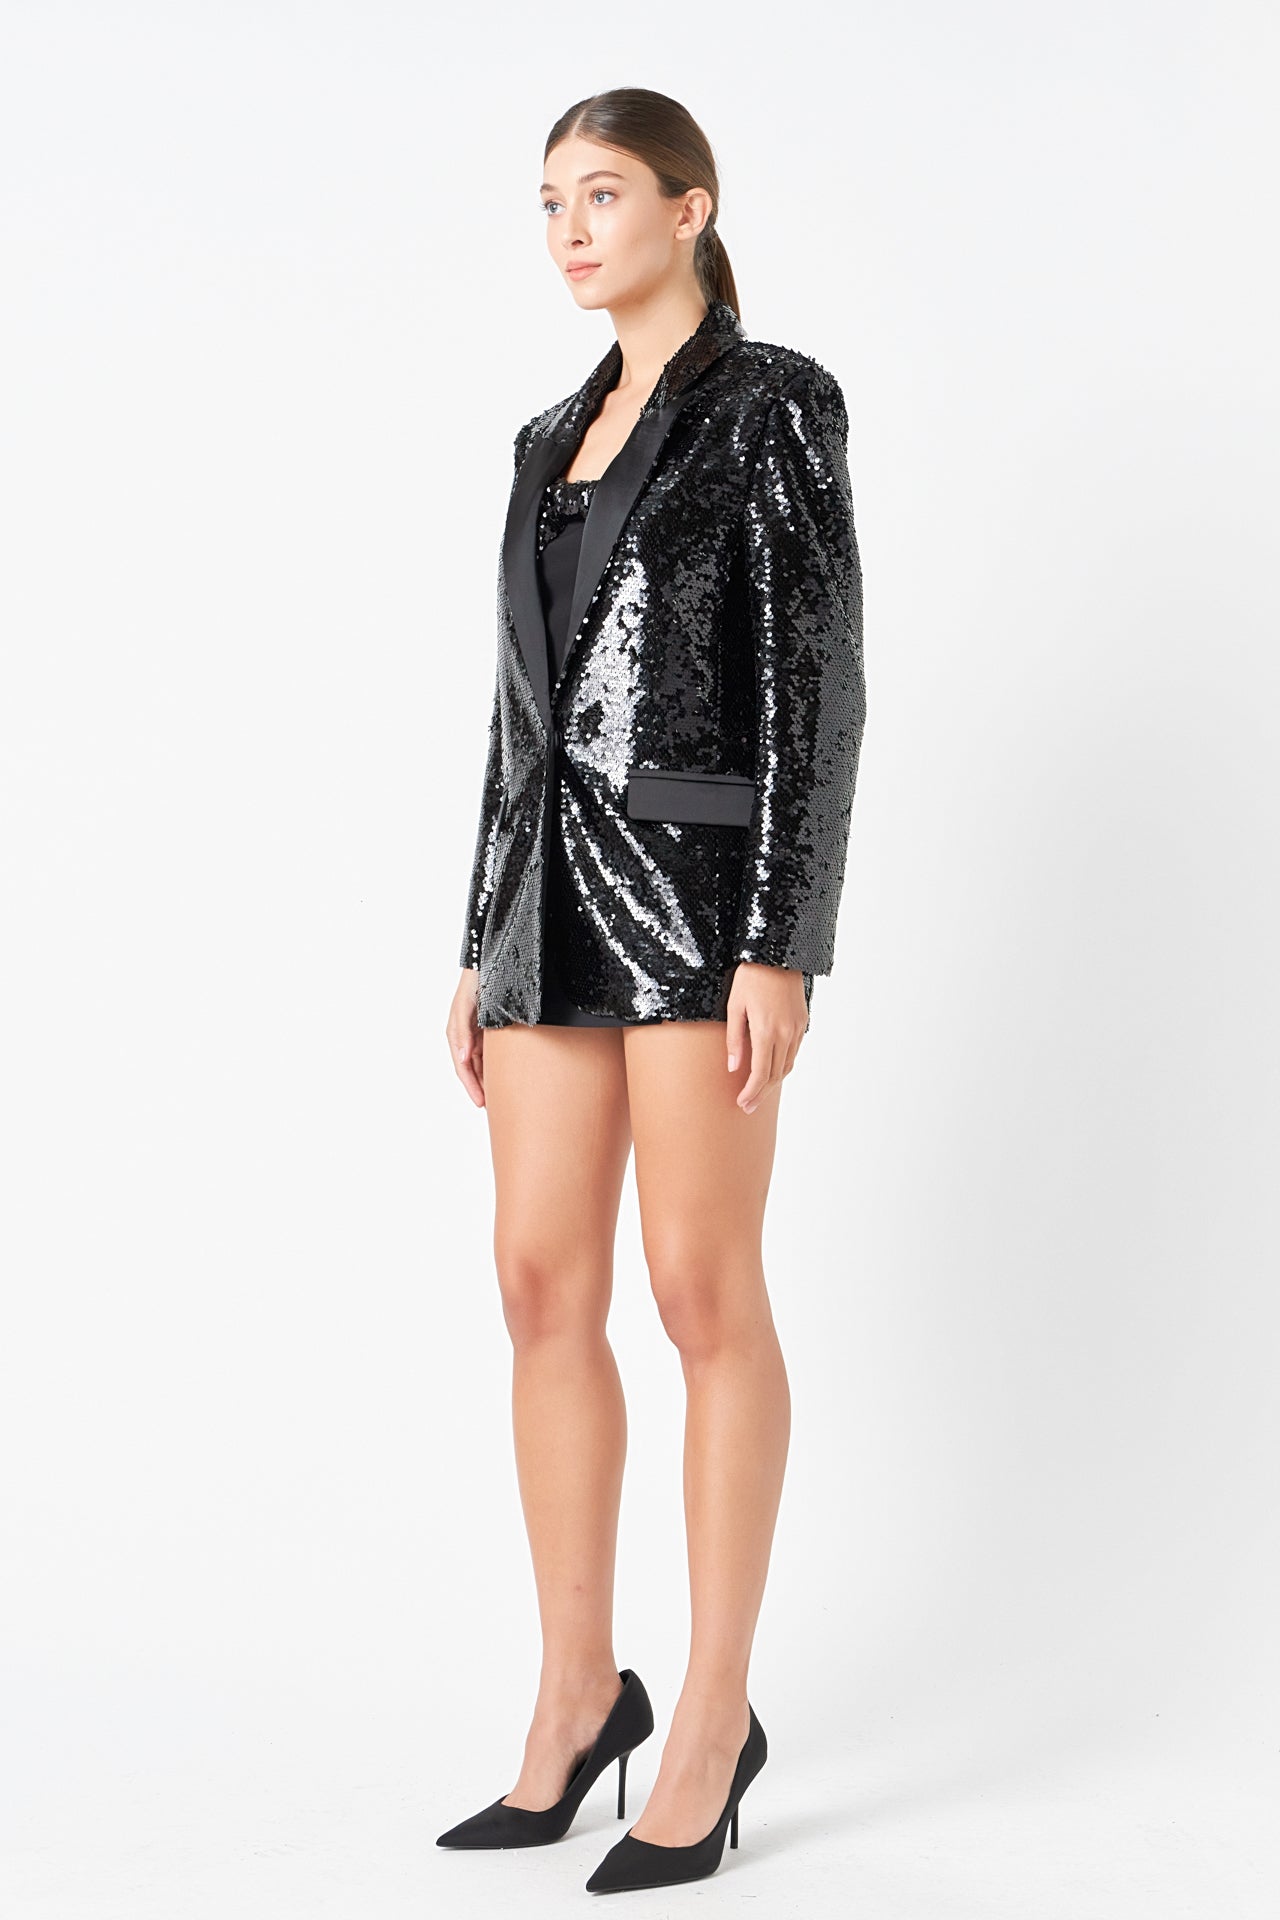 ENDLESS ROSE - Sequin Oversized Jacket - JACKETS available at Objectrare